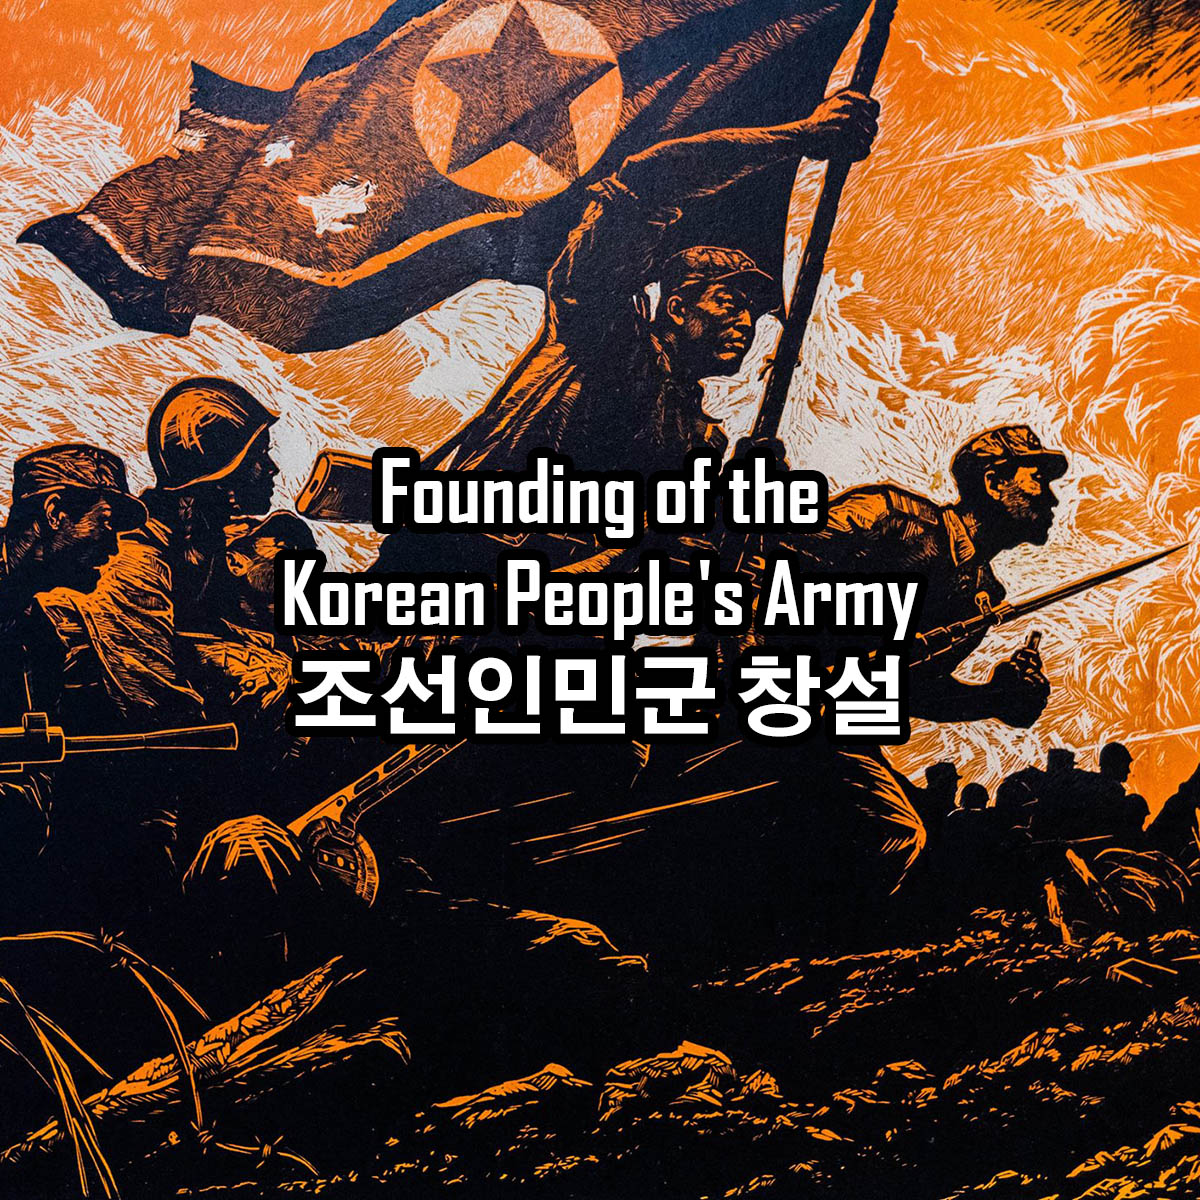 Founding of the Korean People’s Army.